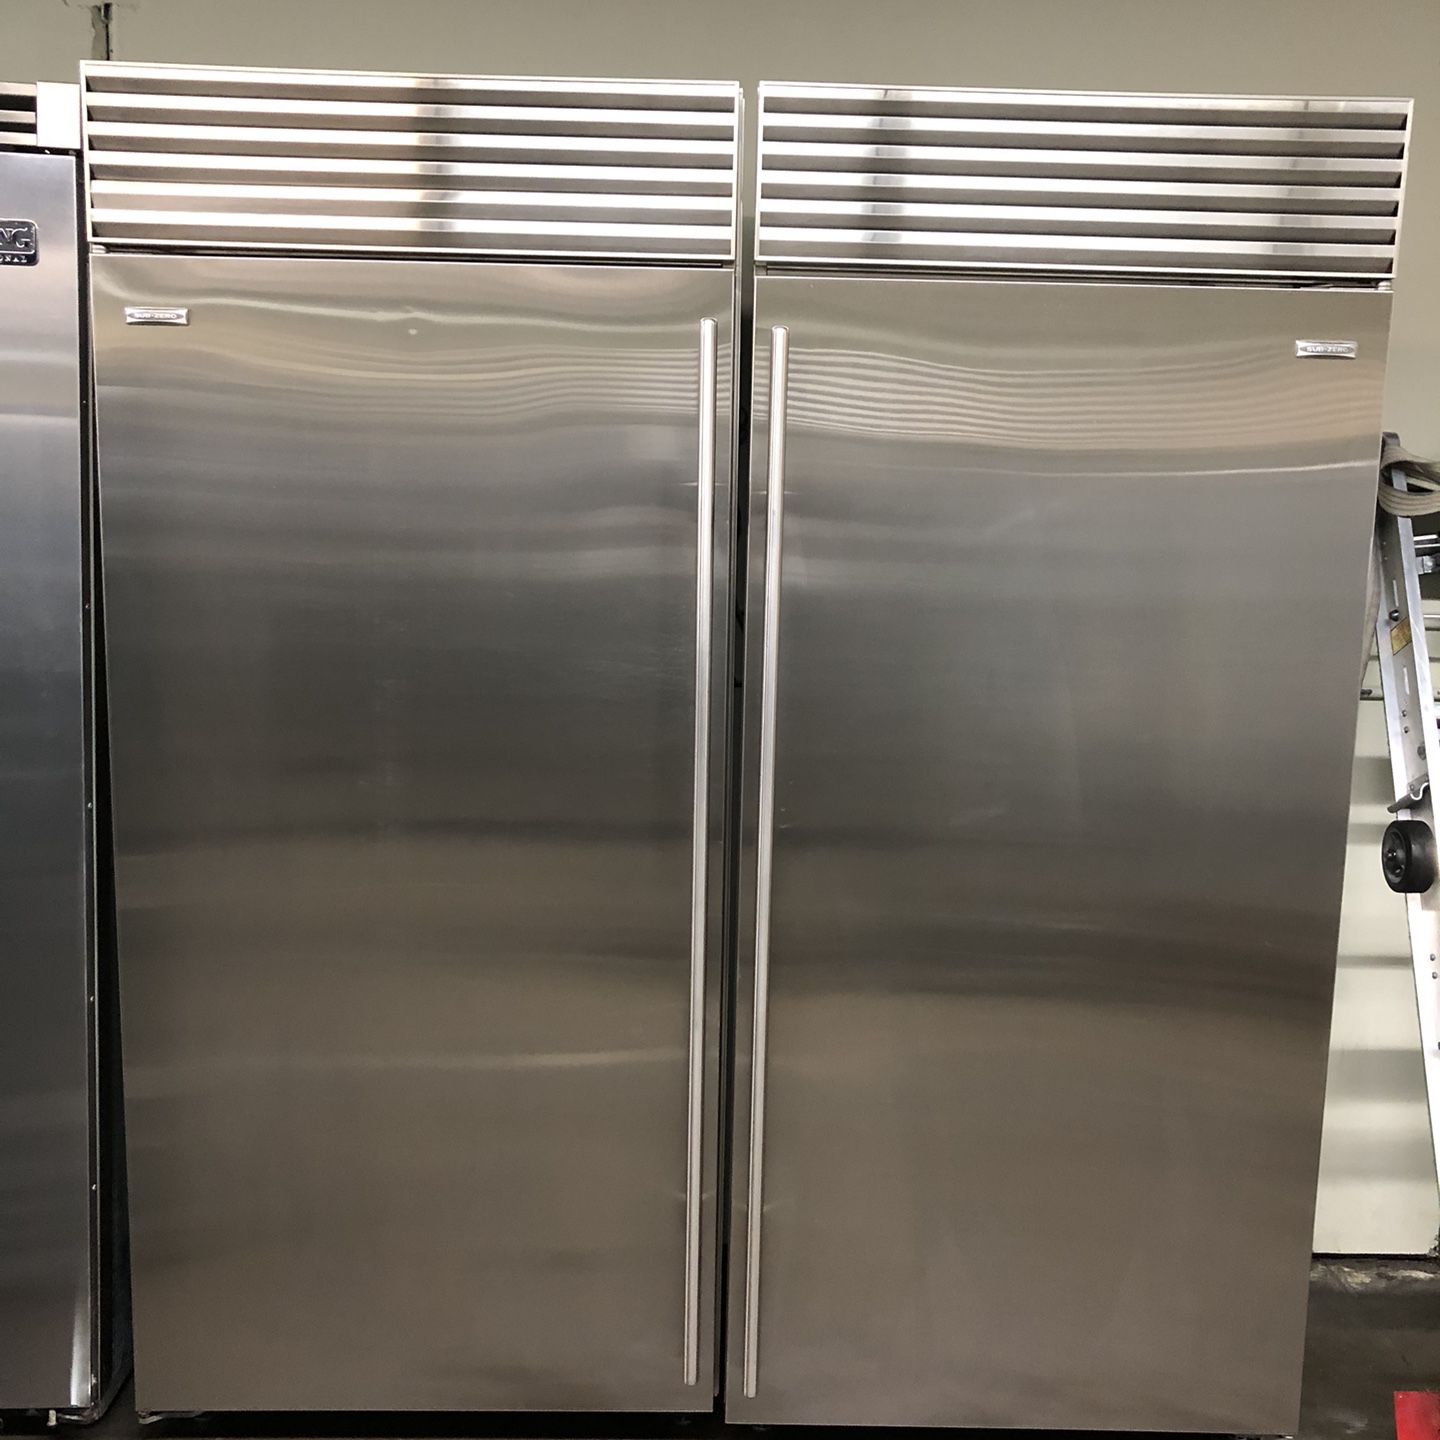 Sub Zero 72”wide Stainless Steel Built In Side By Side Refrigerator Columns 